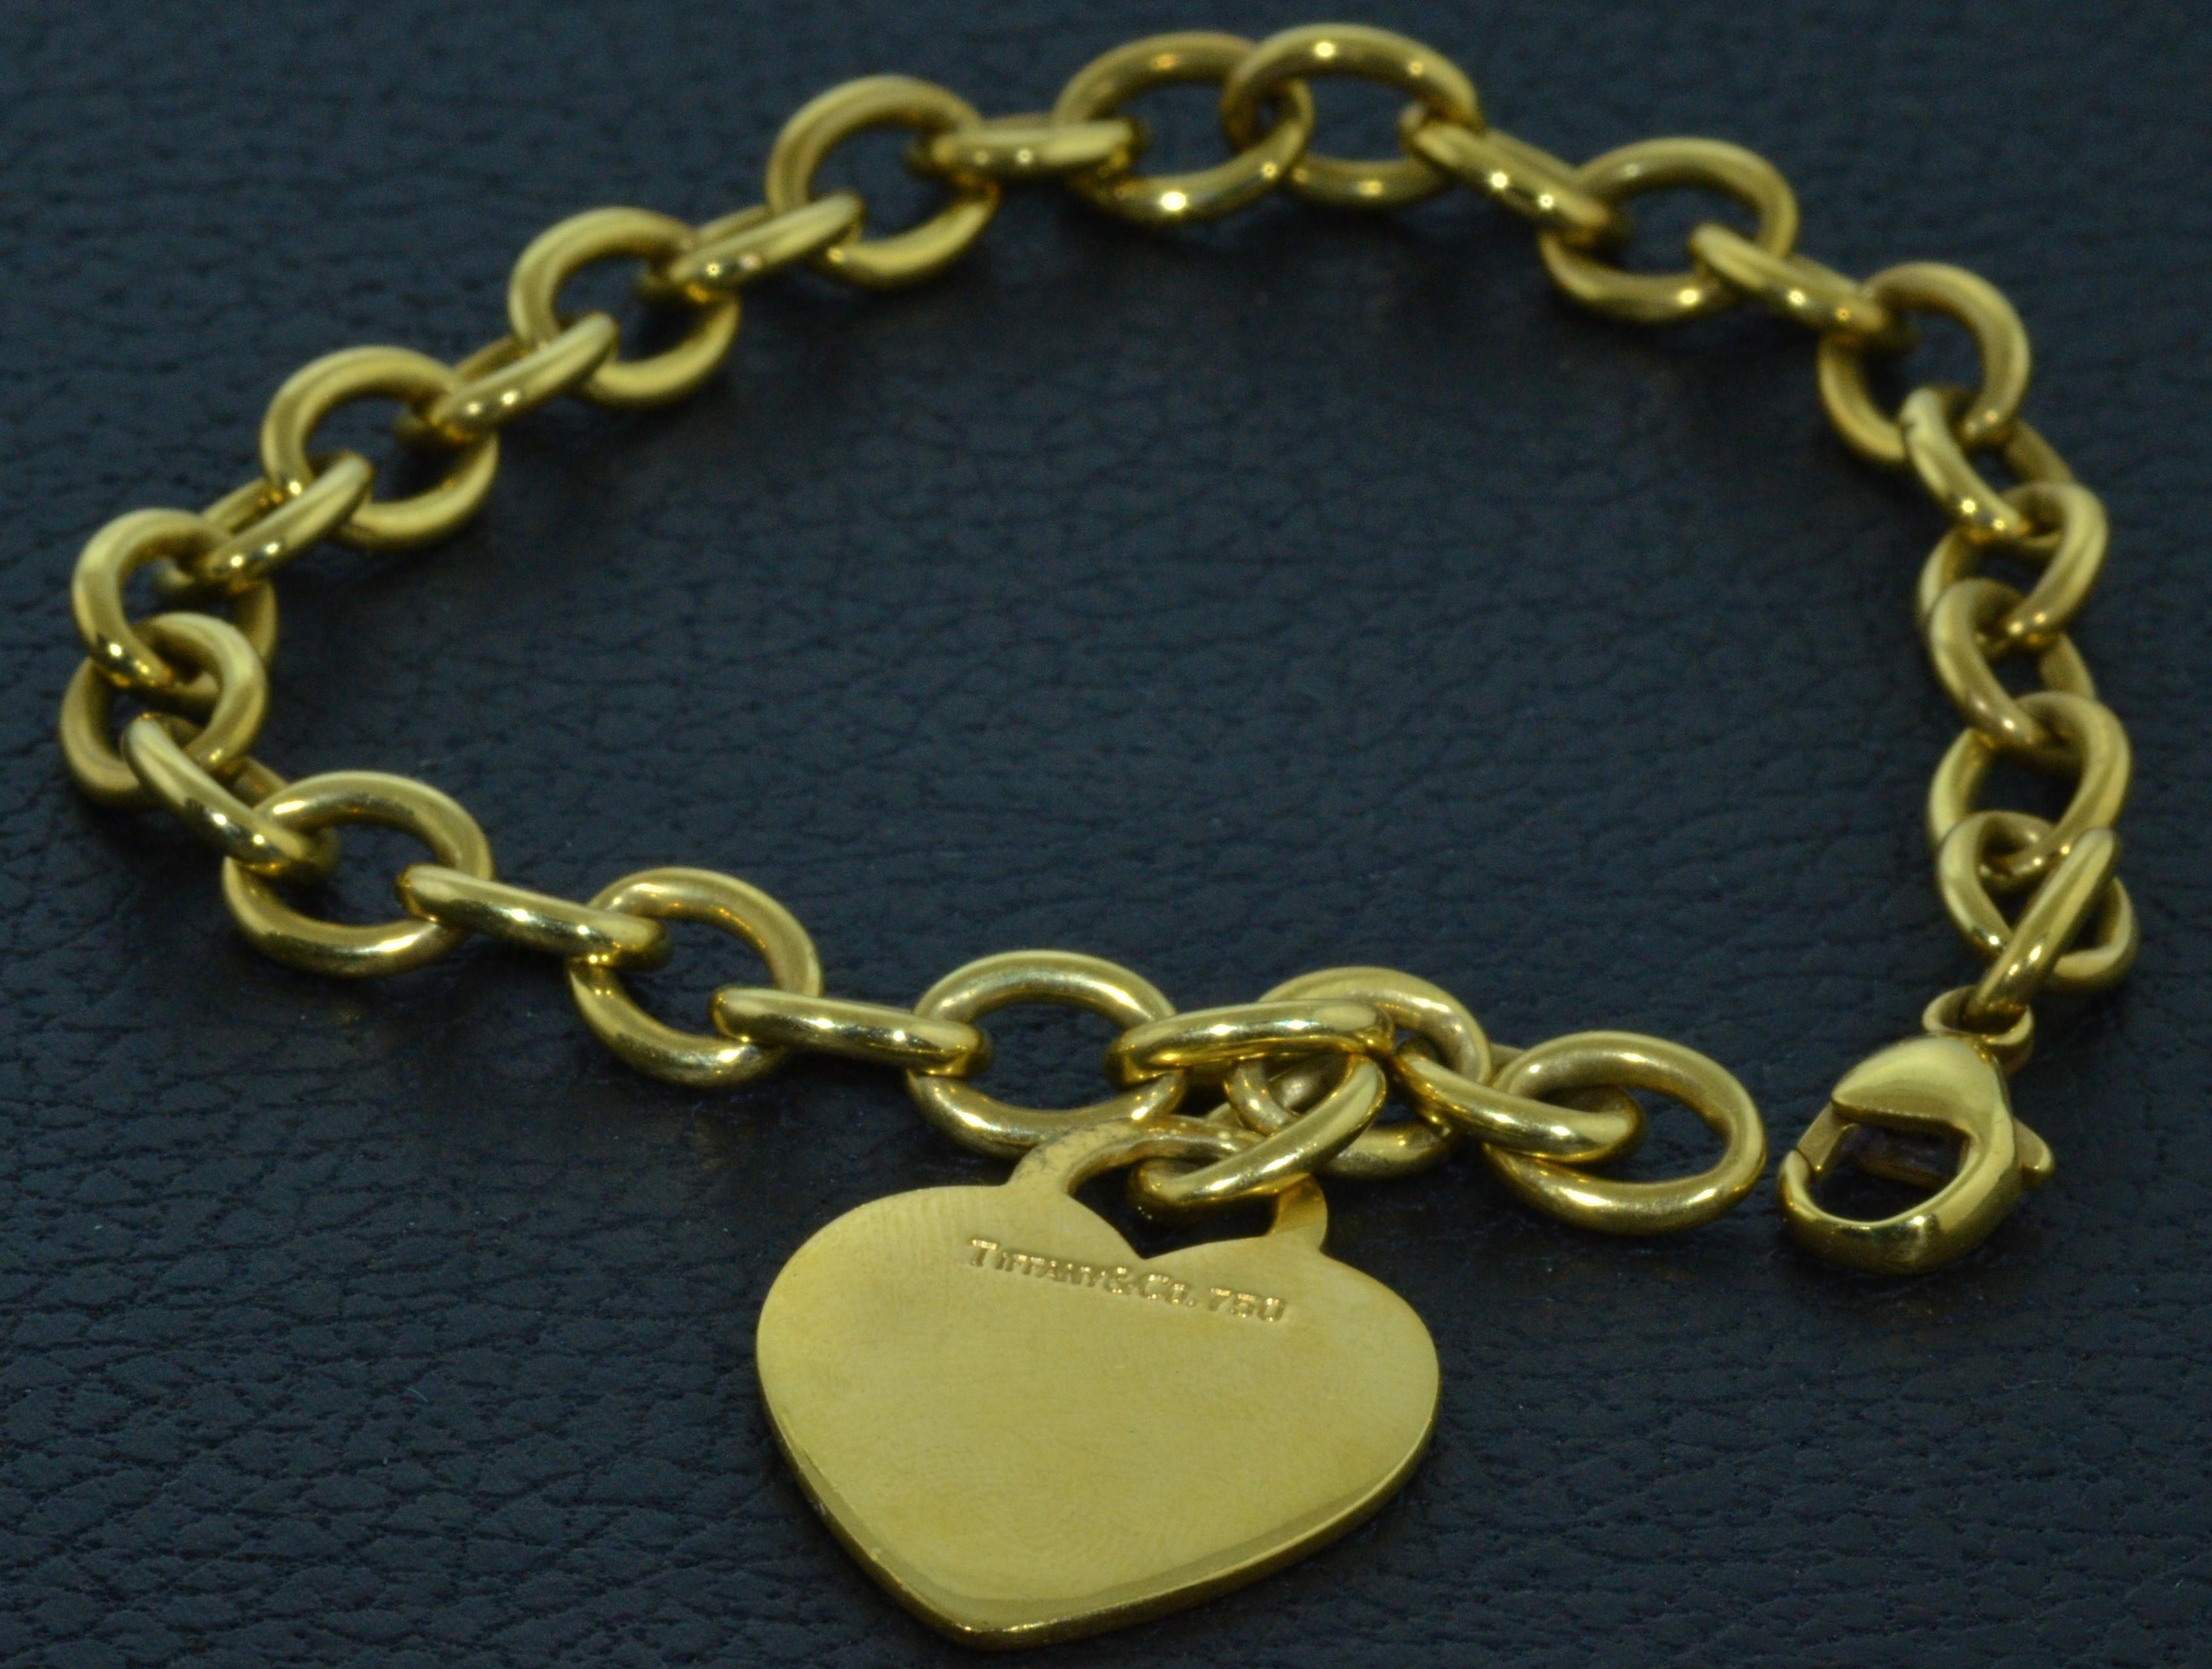 Classic, timeless authentic Tiffany & Co. solid 18 karat yellow gold oval link chain bracelet with a heart shaped charm. Heart has a high polish, blank front and is hallmarked on the back, 